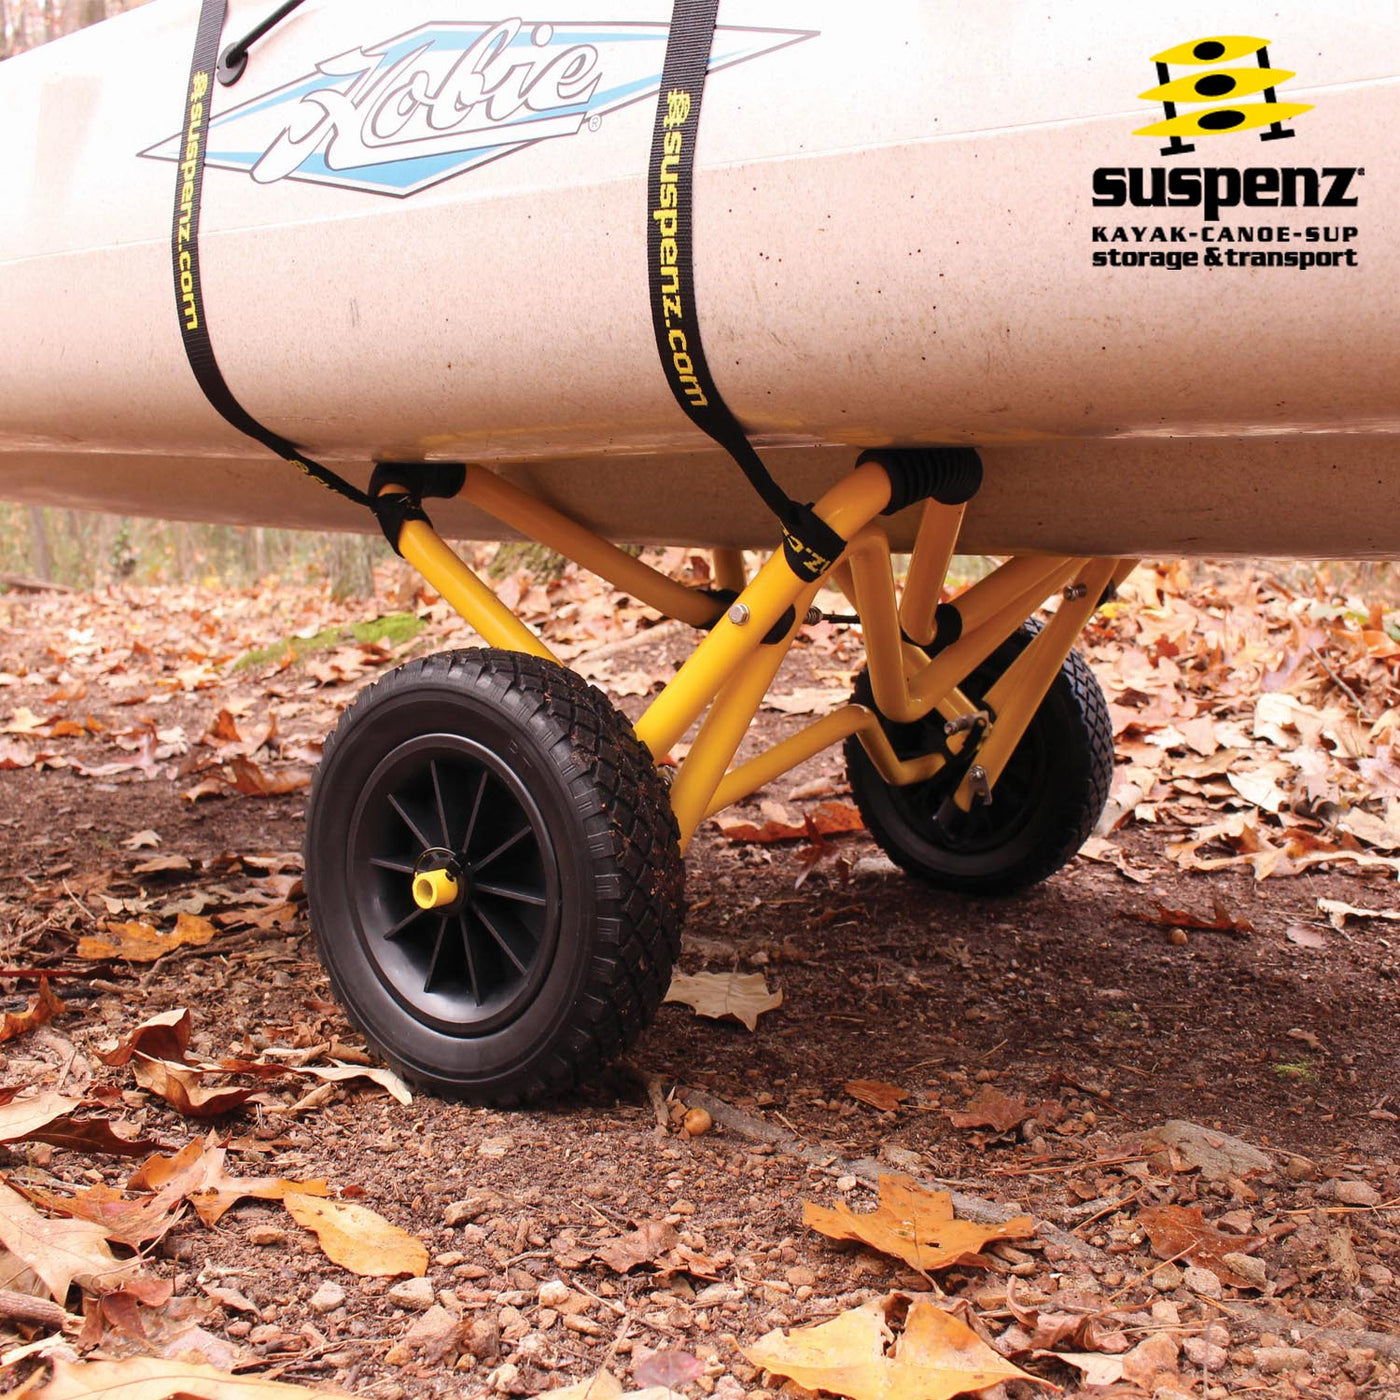 A hobie boat strapped to the Heavy Duty Deep V Cart on a dirt trail